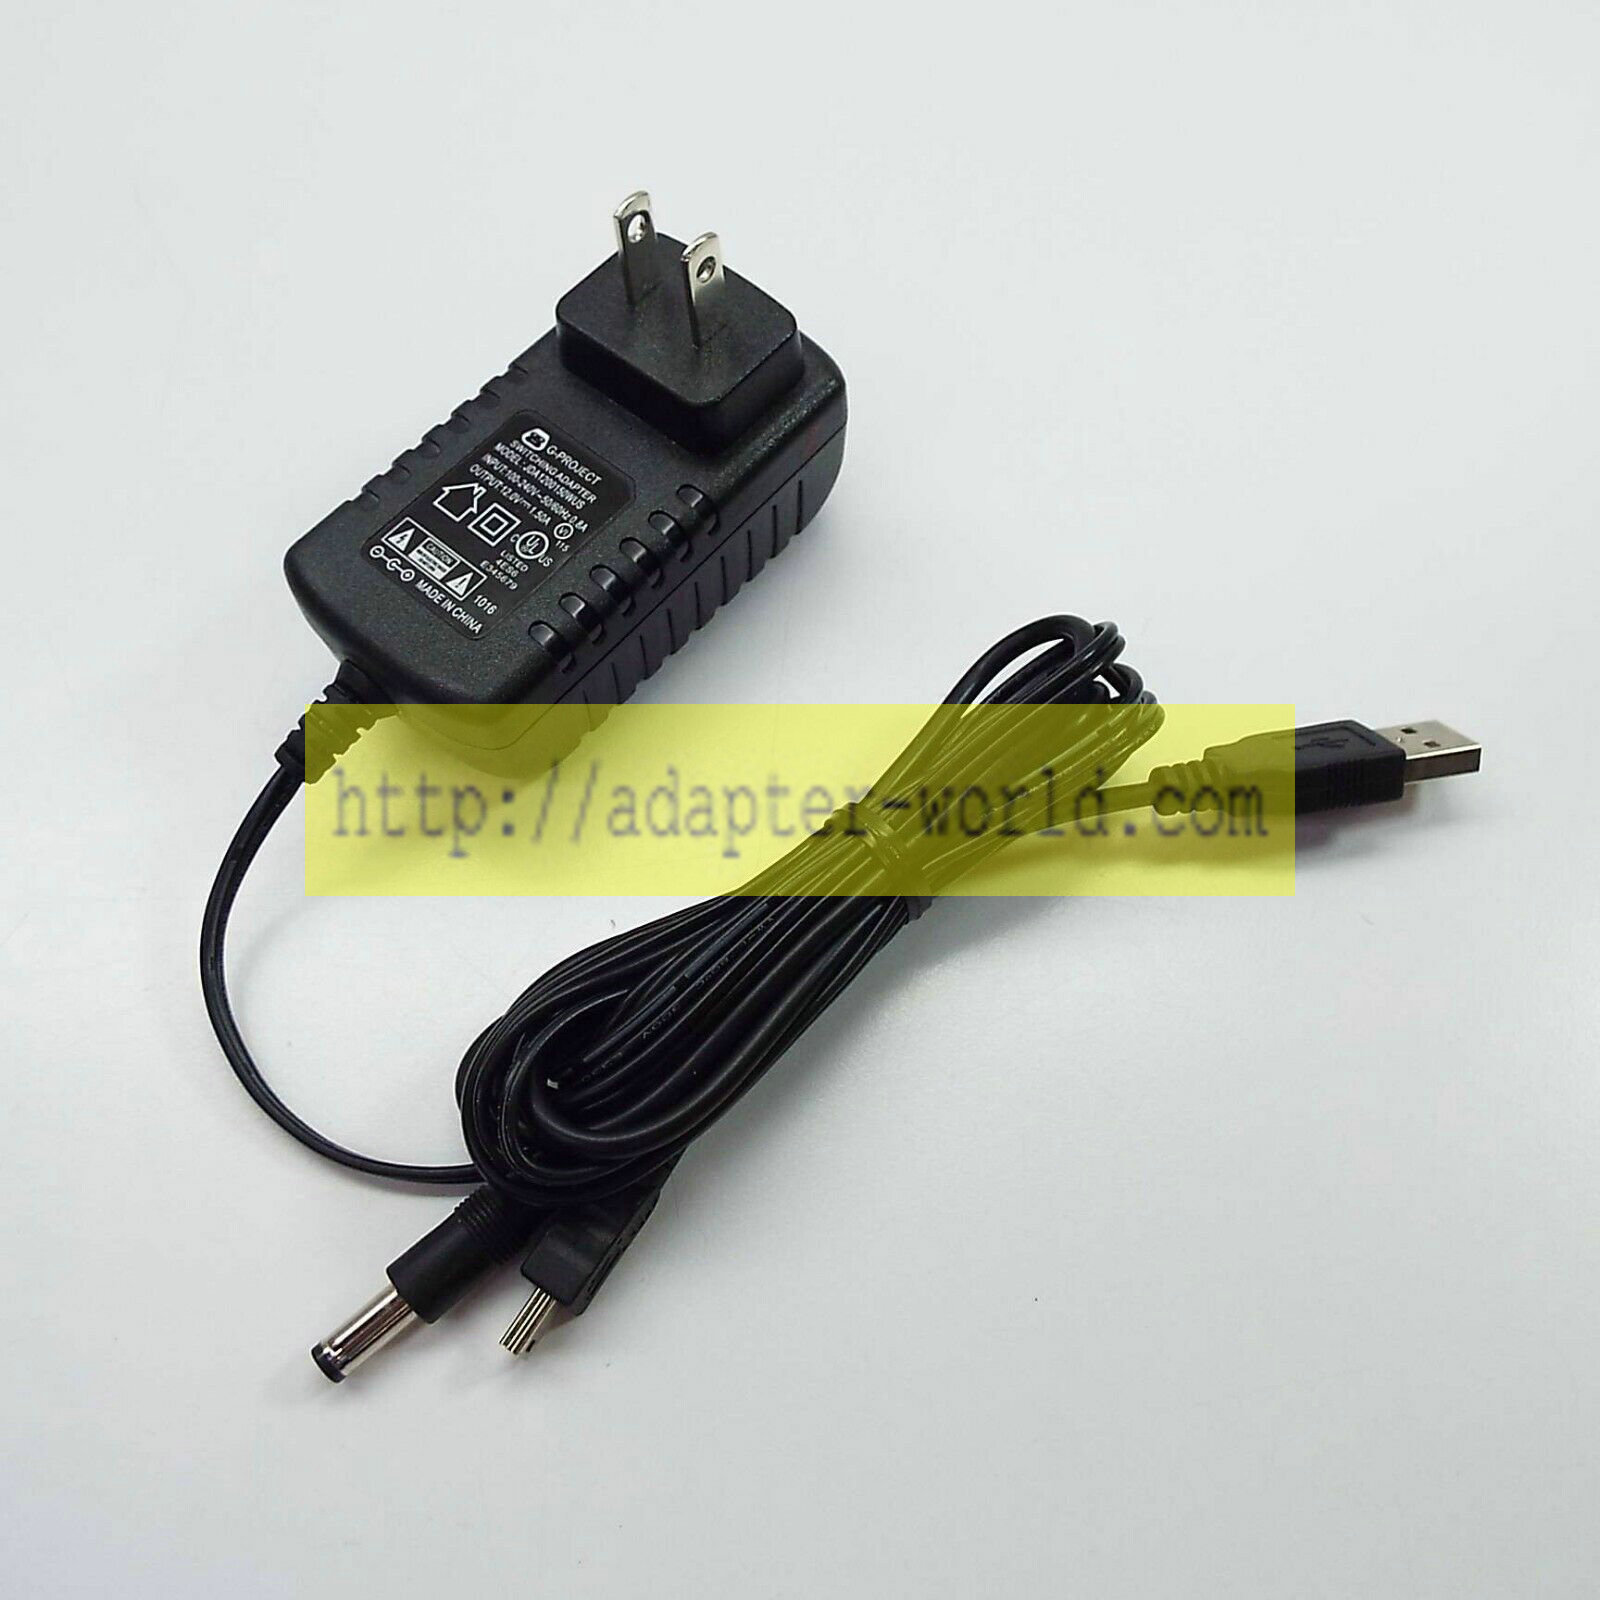 *Brand NEW* G-PROJECT JDA1200150WUS 12.0V 1.50A AC DC Adapter I2900 POWER SUPPLY - Click Image to Close